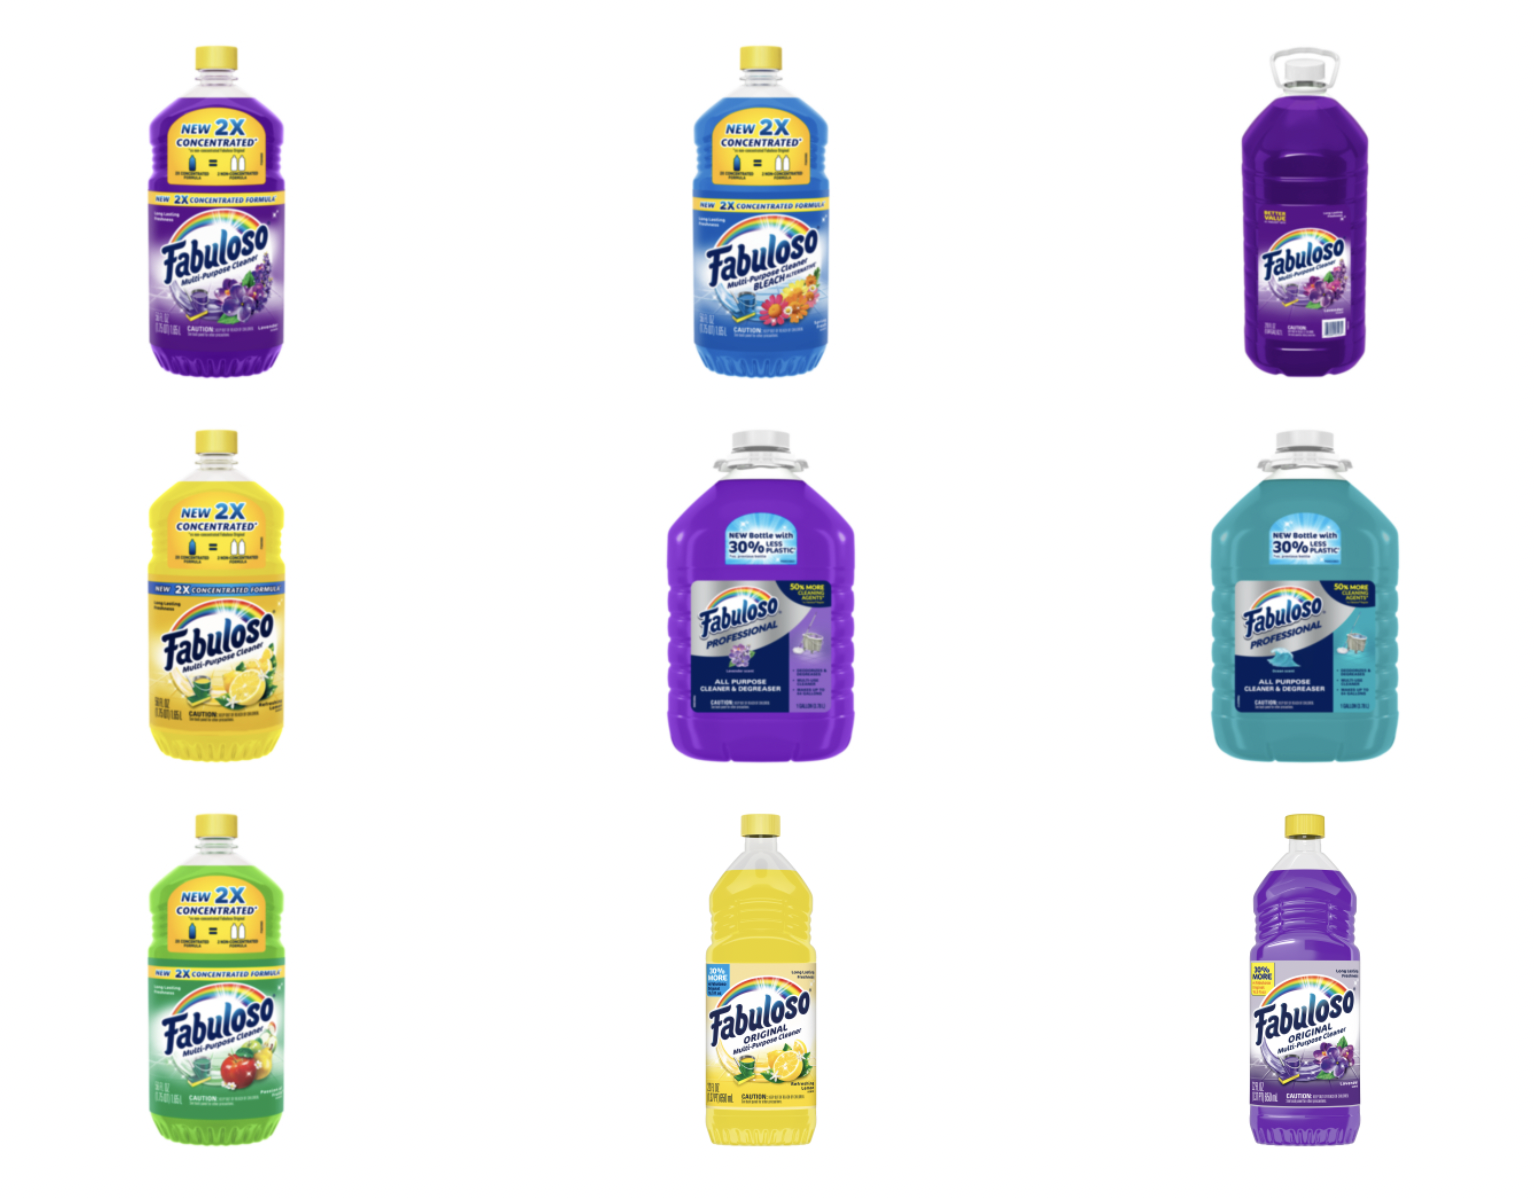 Colgate-Palmolive is recalling 4.9 million bottles of its Fabuloso multi-purpose cleaning liquid because the products might be contaminated with bacteria. (Photo courtesy Colgate Palmolive)